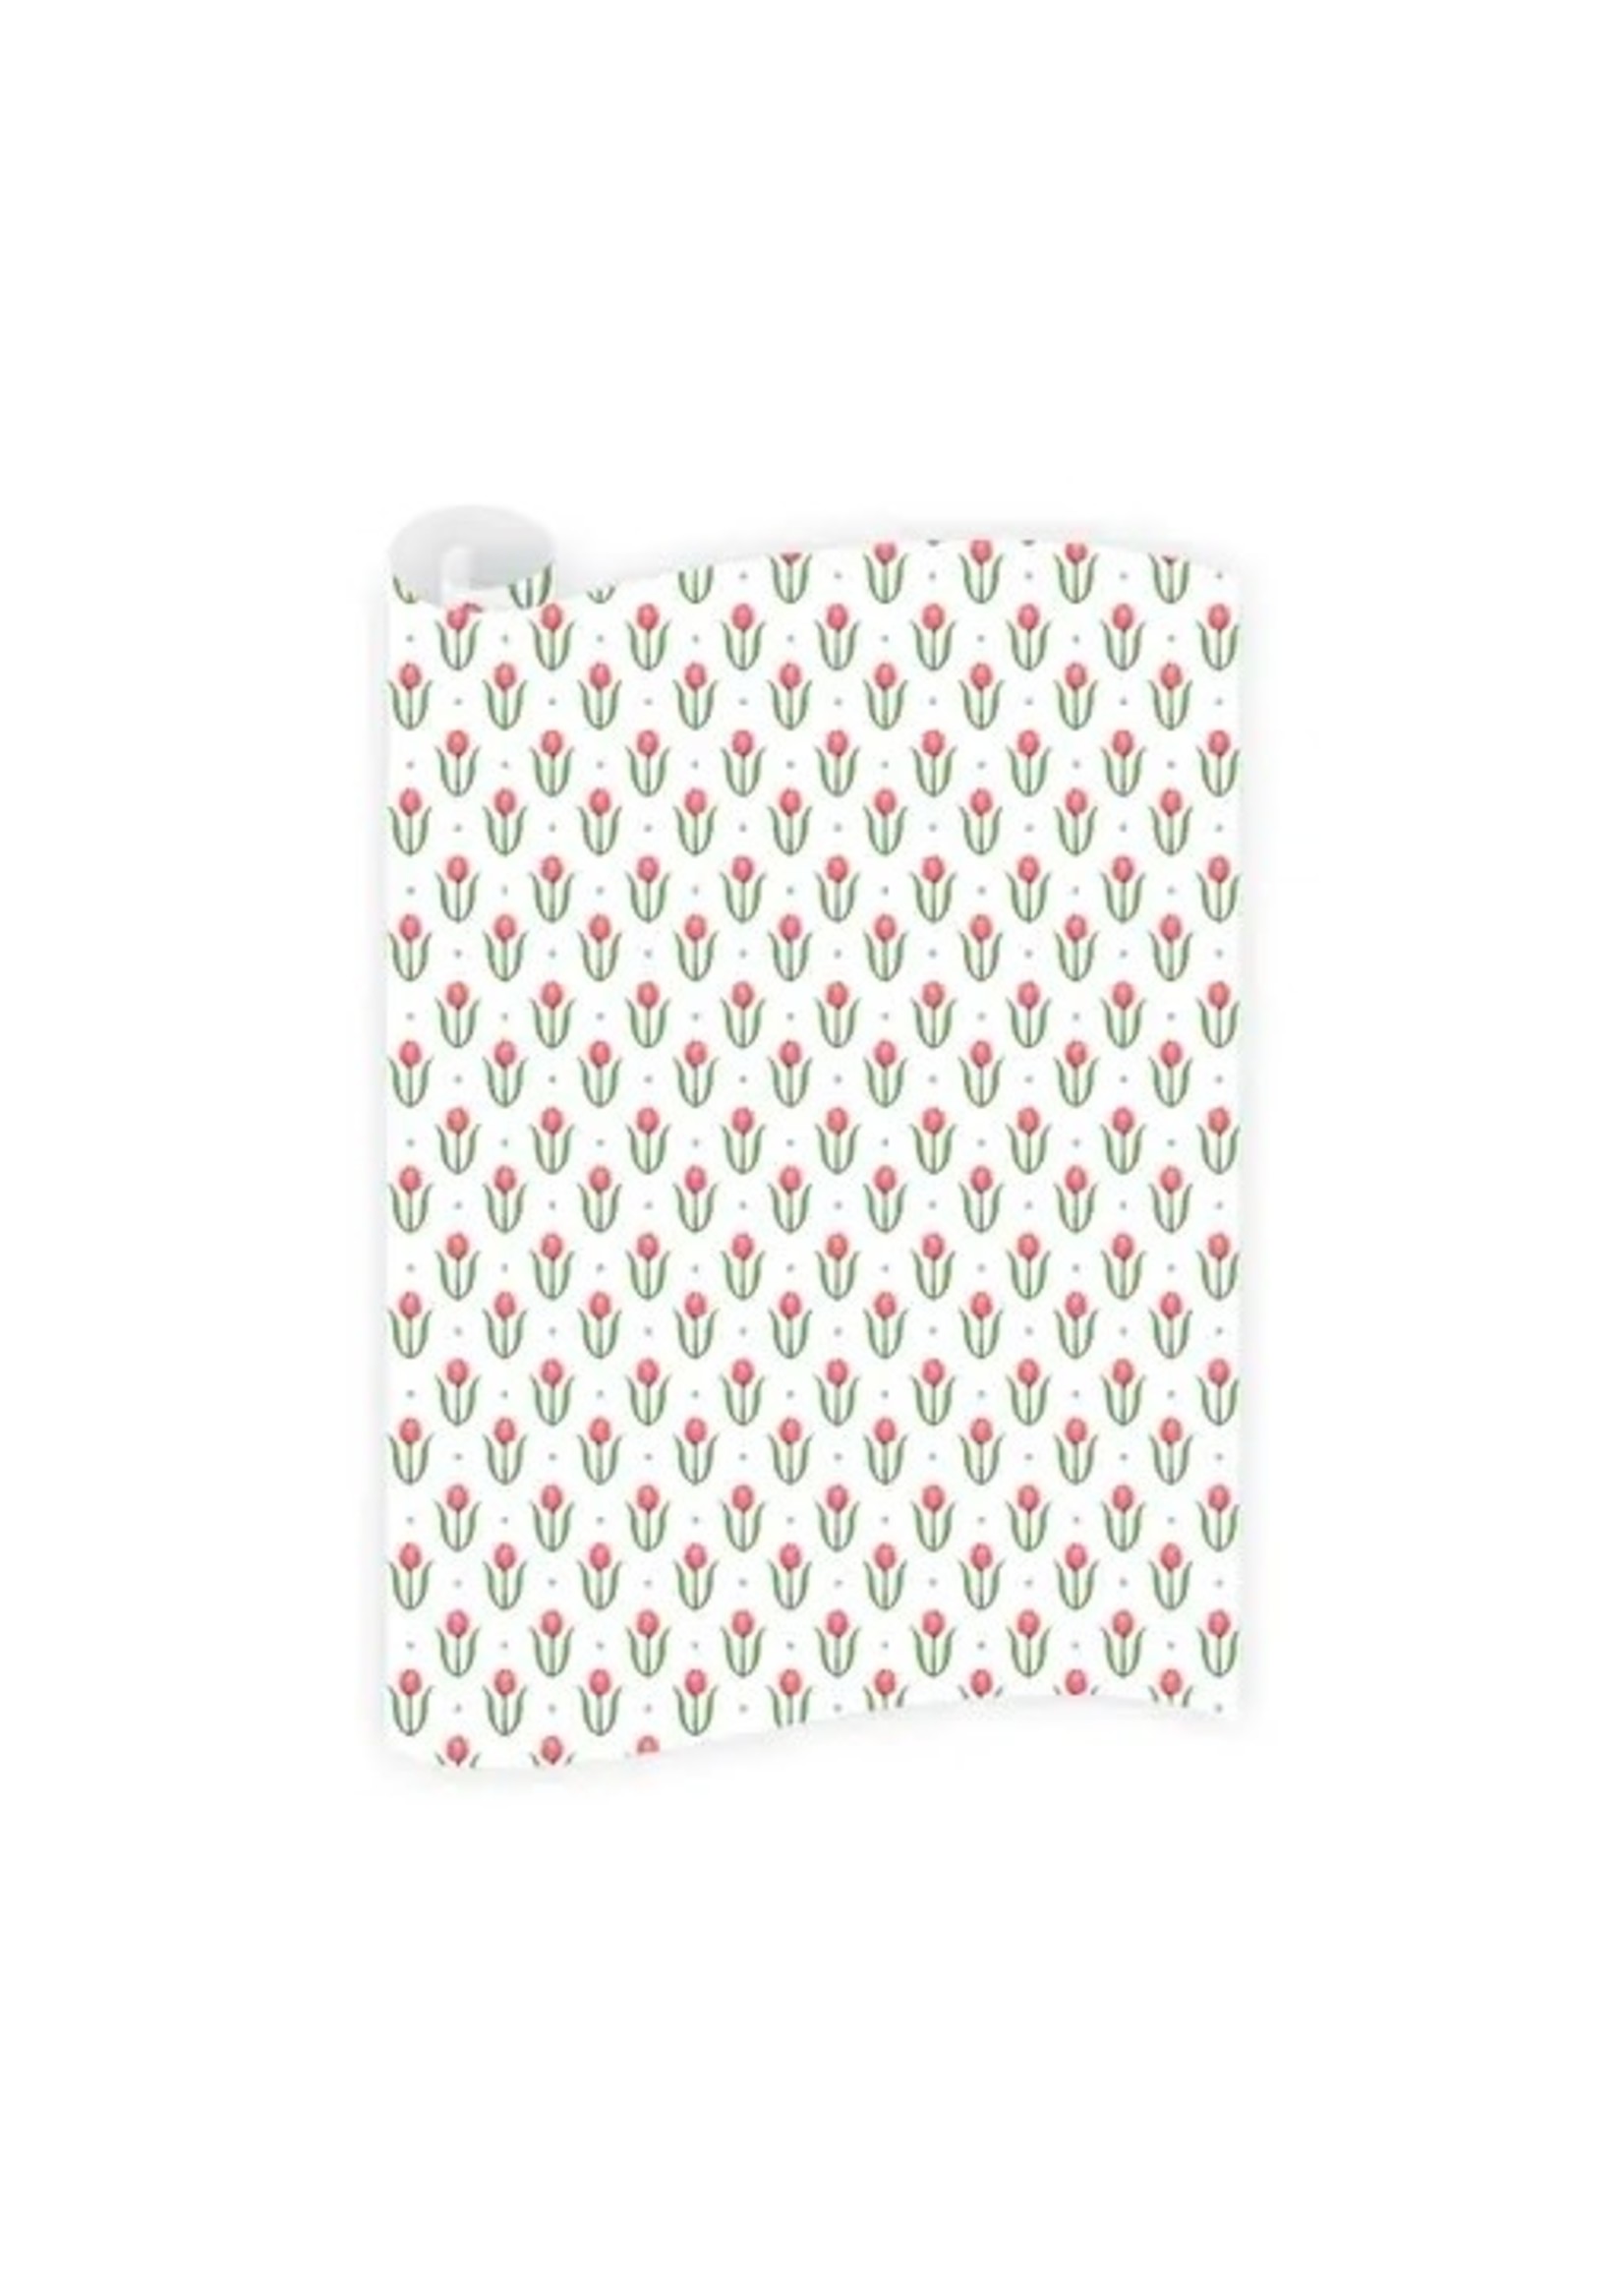 Dogwood Hill Gift Wrap Sheets - Flower Cart Tulips (3 sheets)